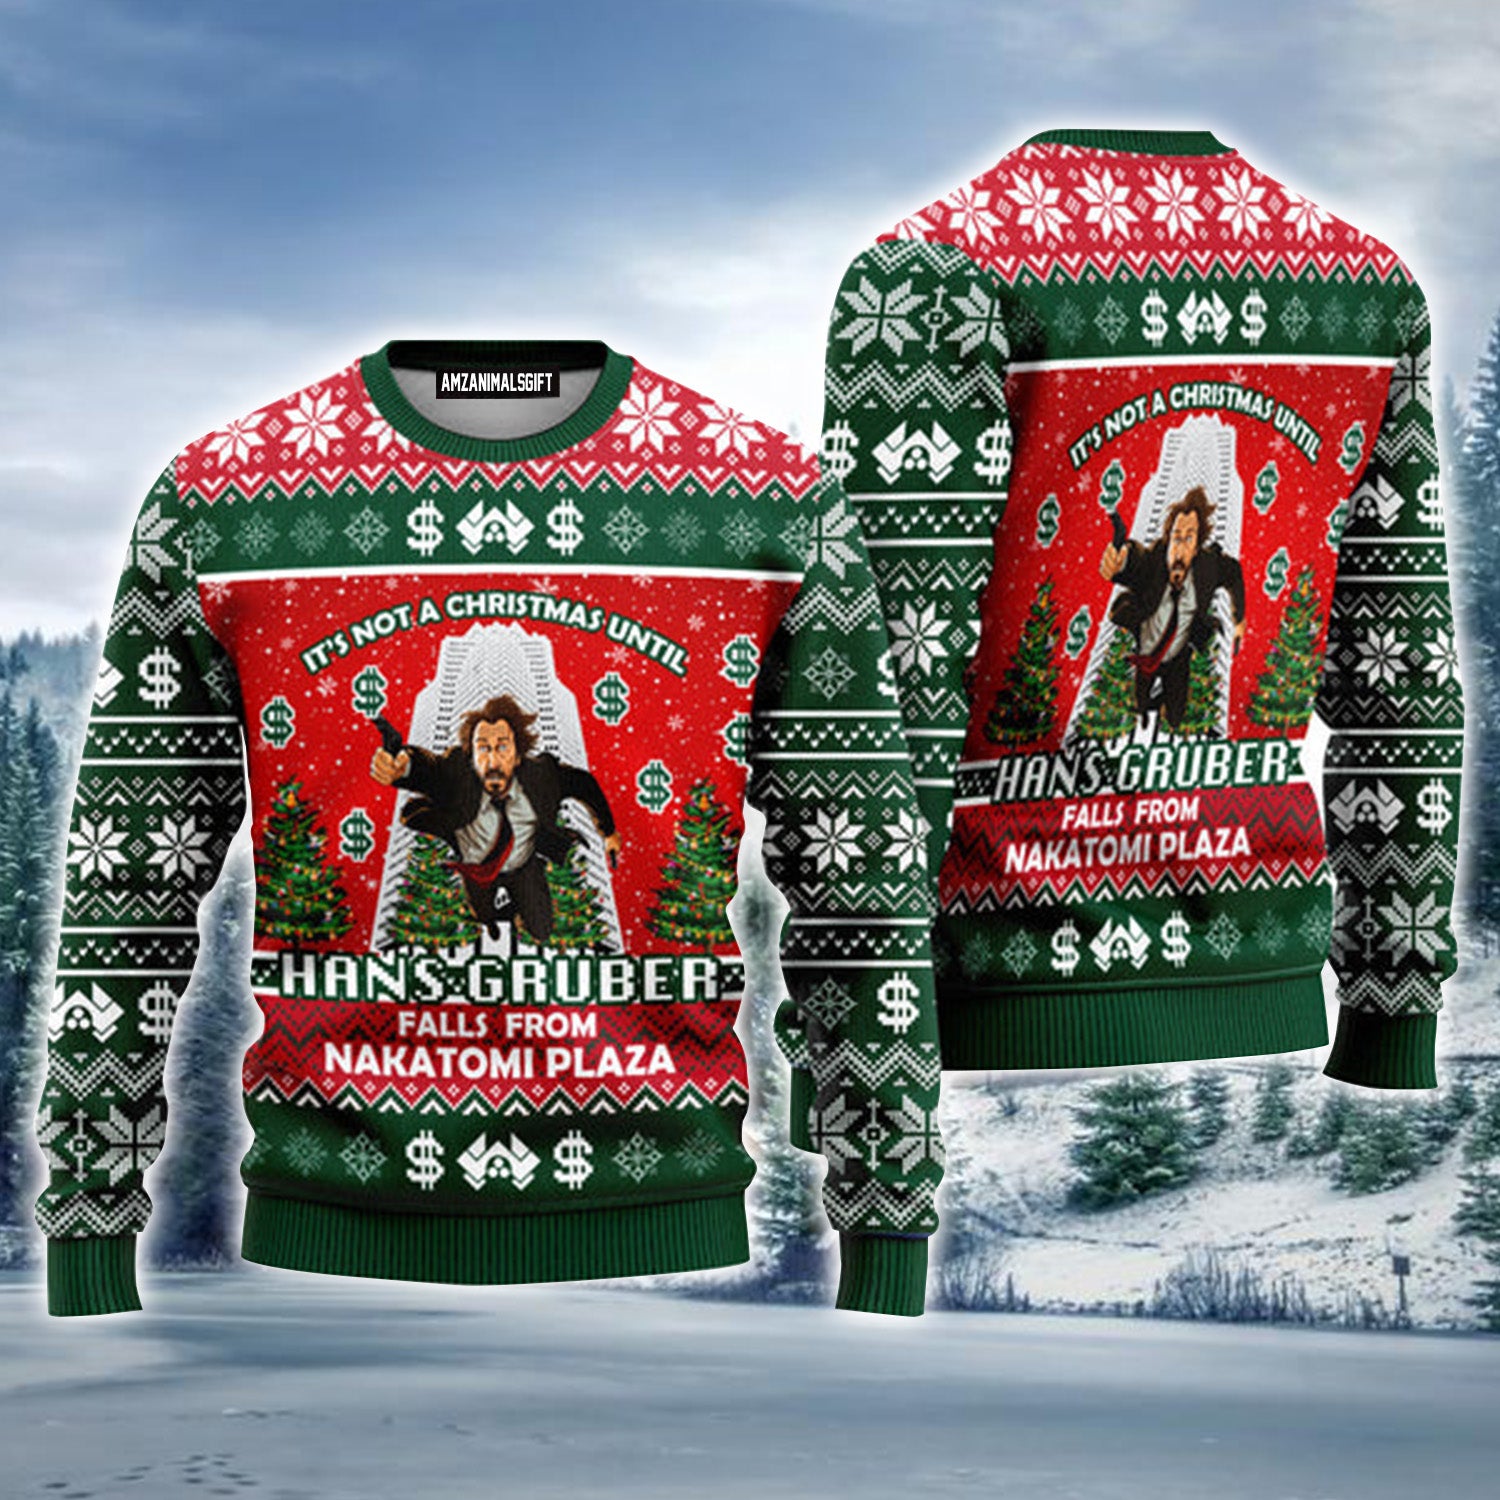 It's Not Christmas Until Fall From Nakatomi Plaza Urly Christmas Sweater For Men & Women - Perfect Gift For Christmas, Family, Friends